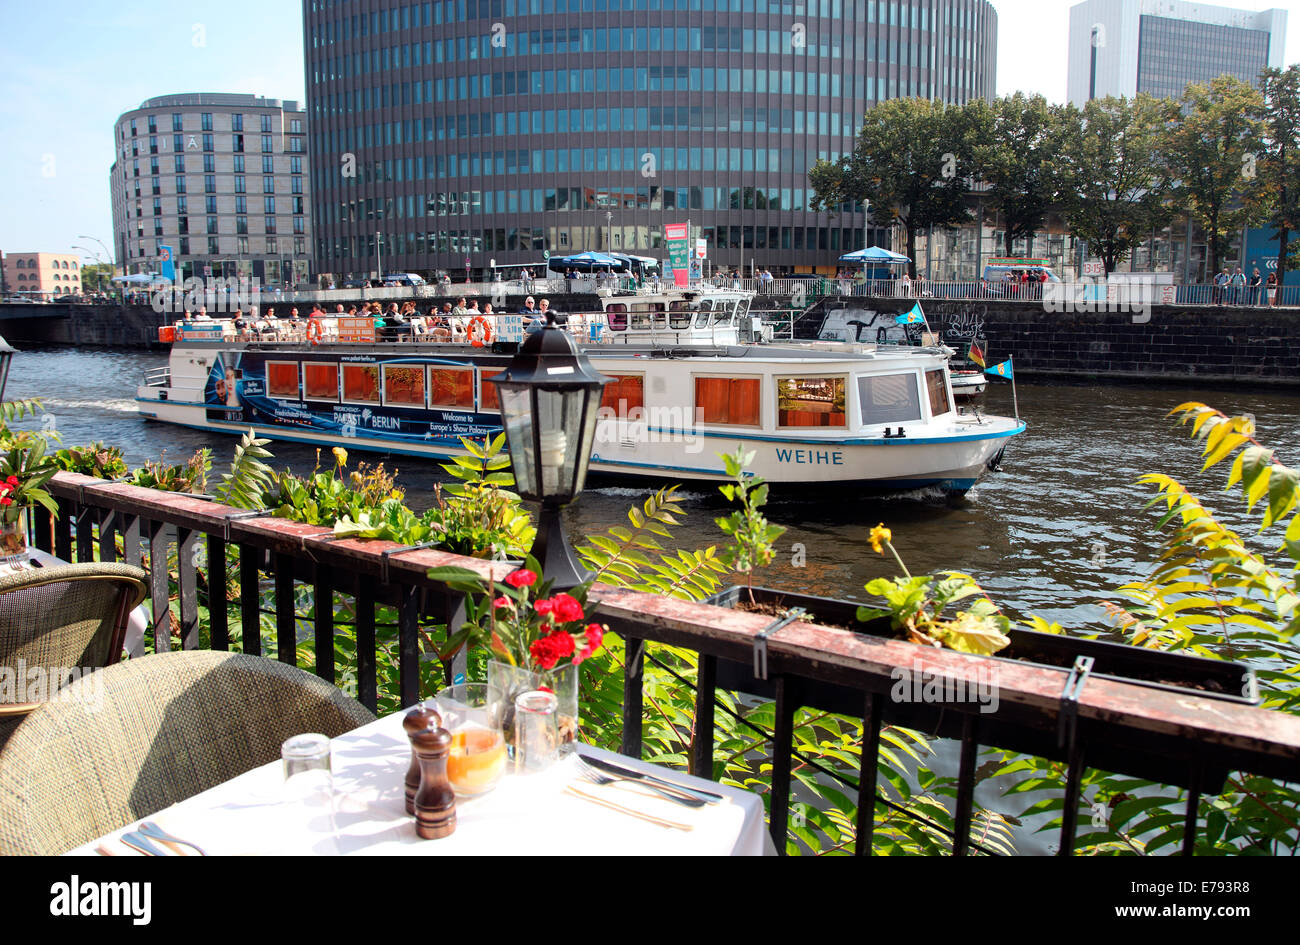 Sightseeing cruise boat on the River Spree, Berlin Stock Photo